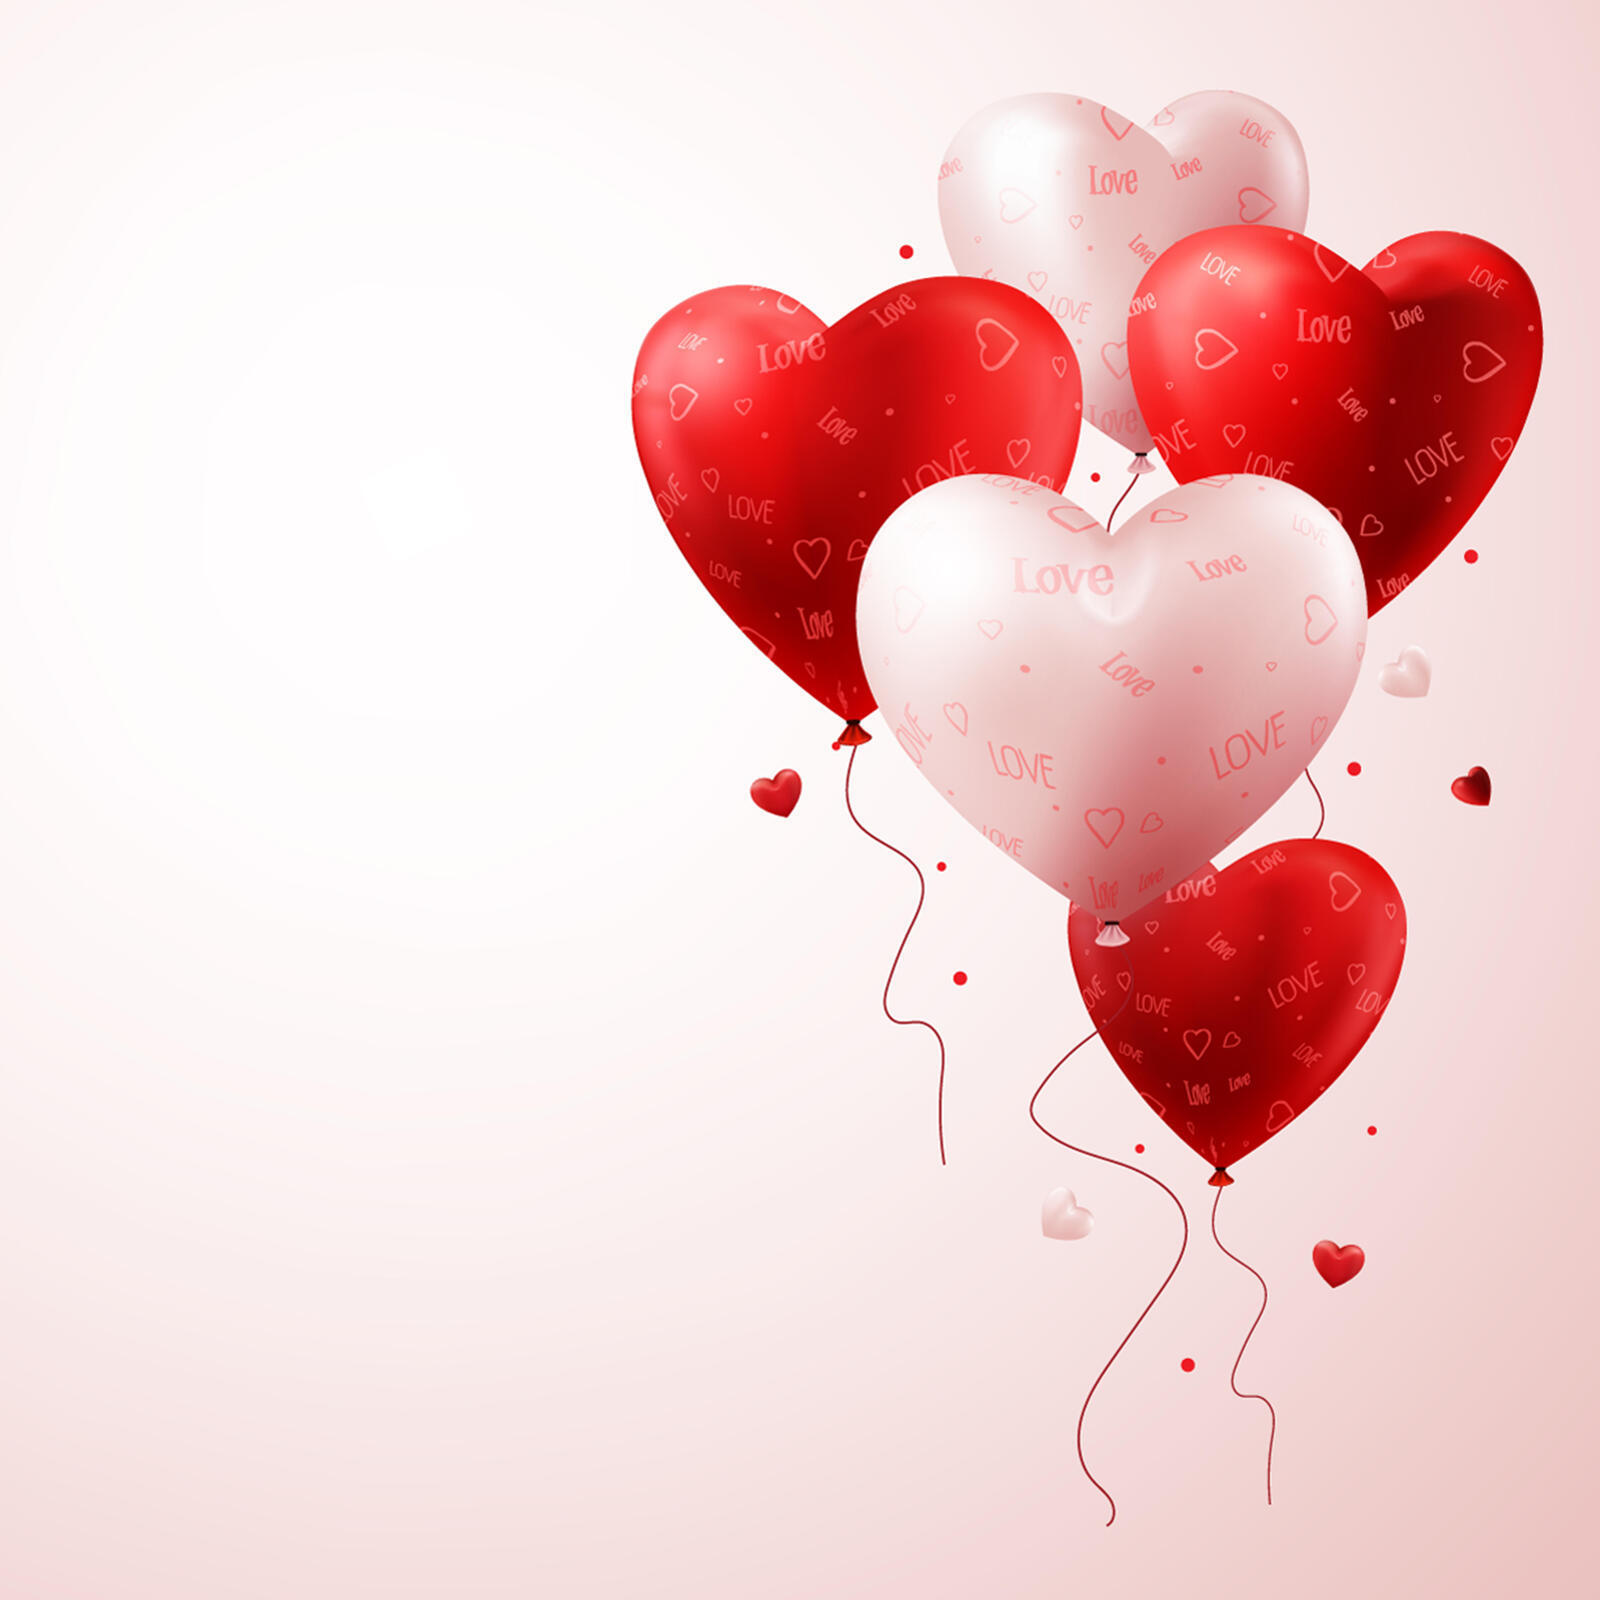 Wallpapers valentines a day of lovers romantic hearts on the desktop